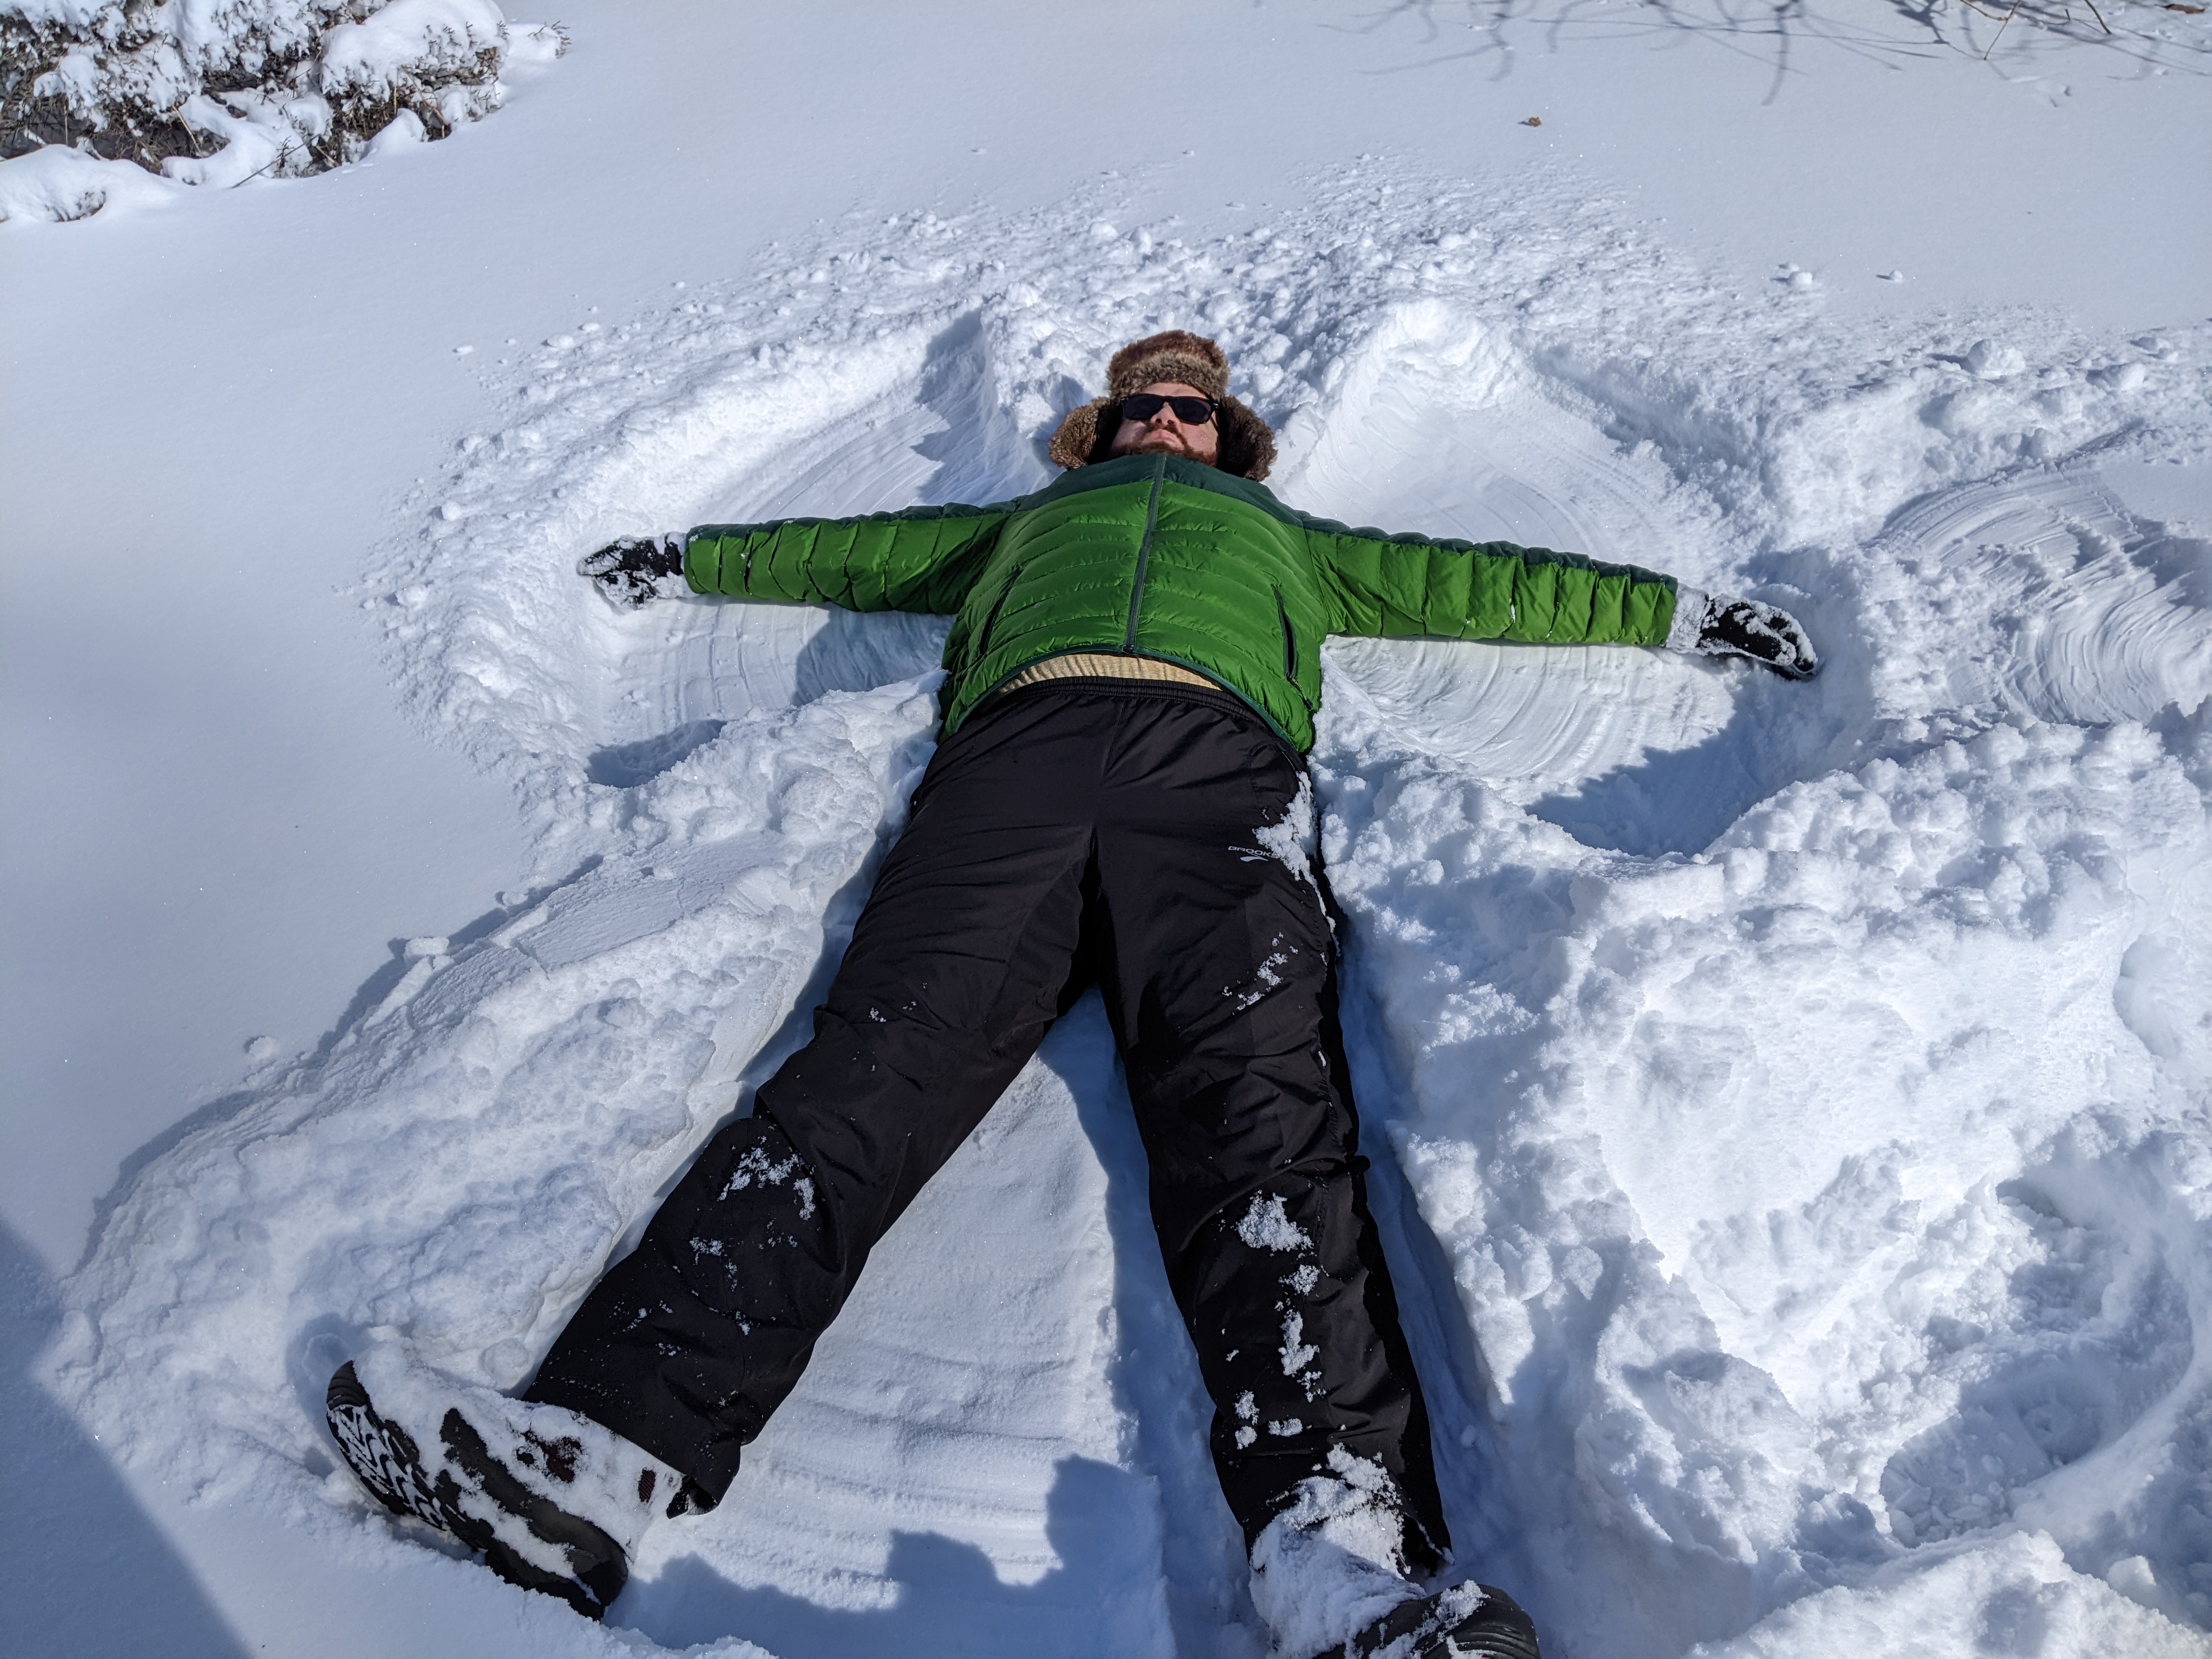 The author, still in snow angel position, arms in a 